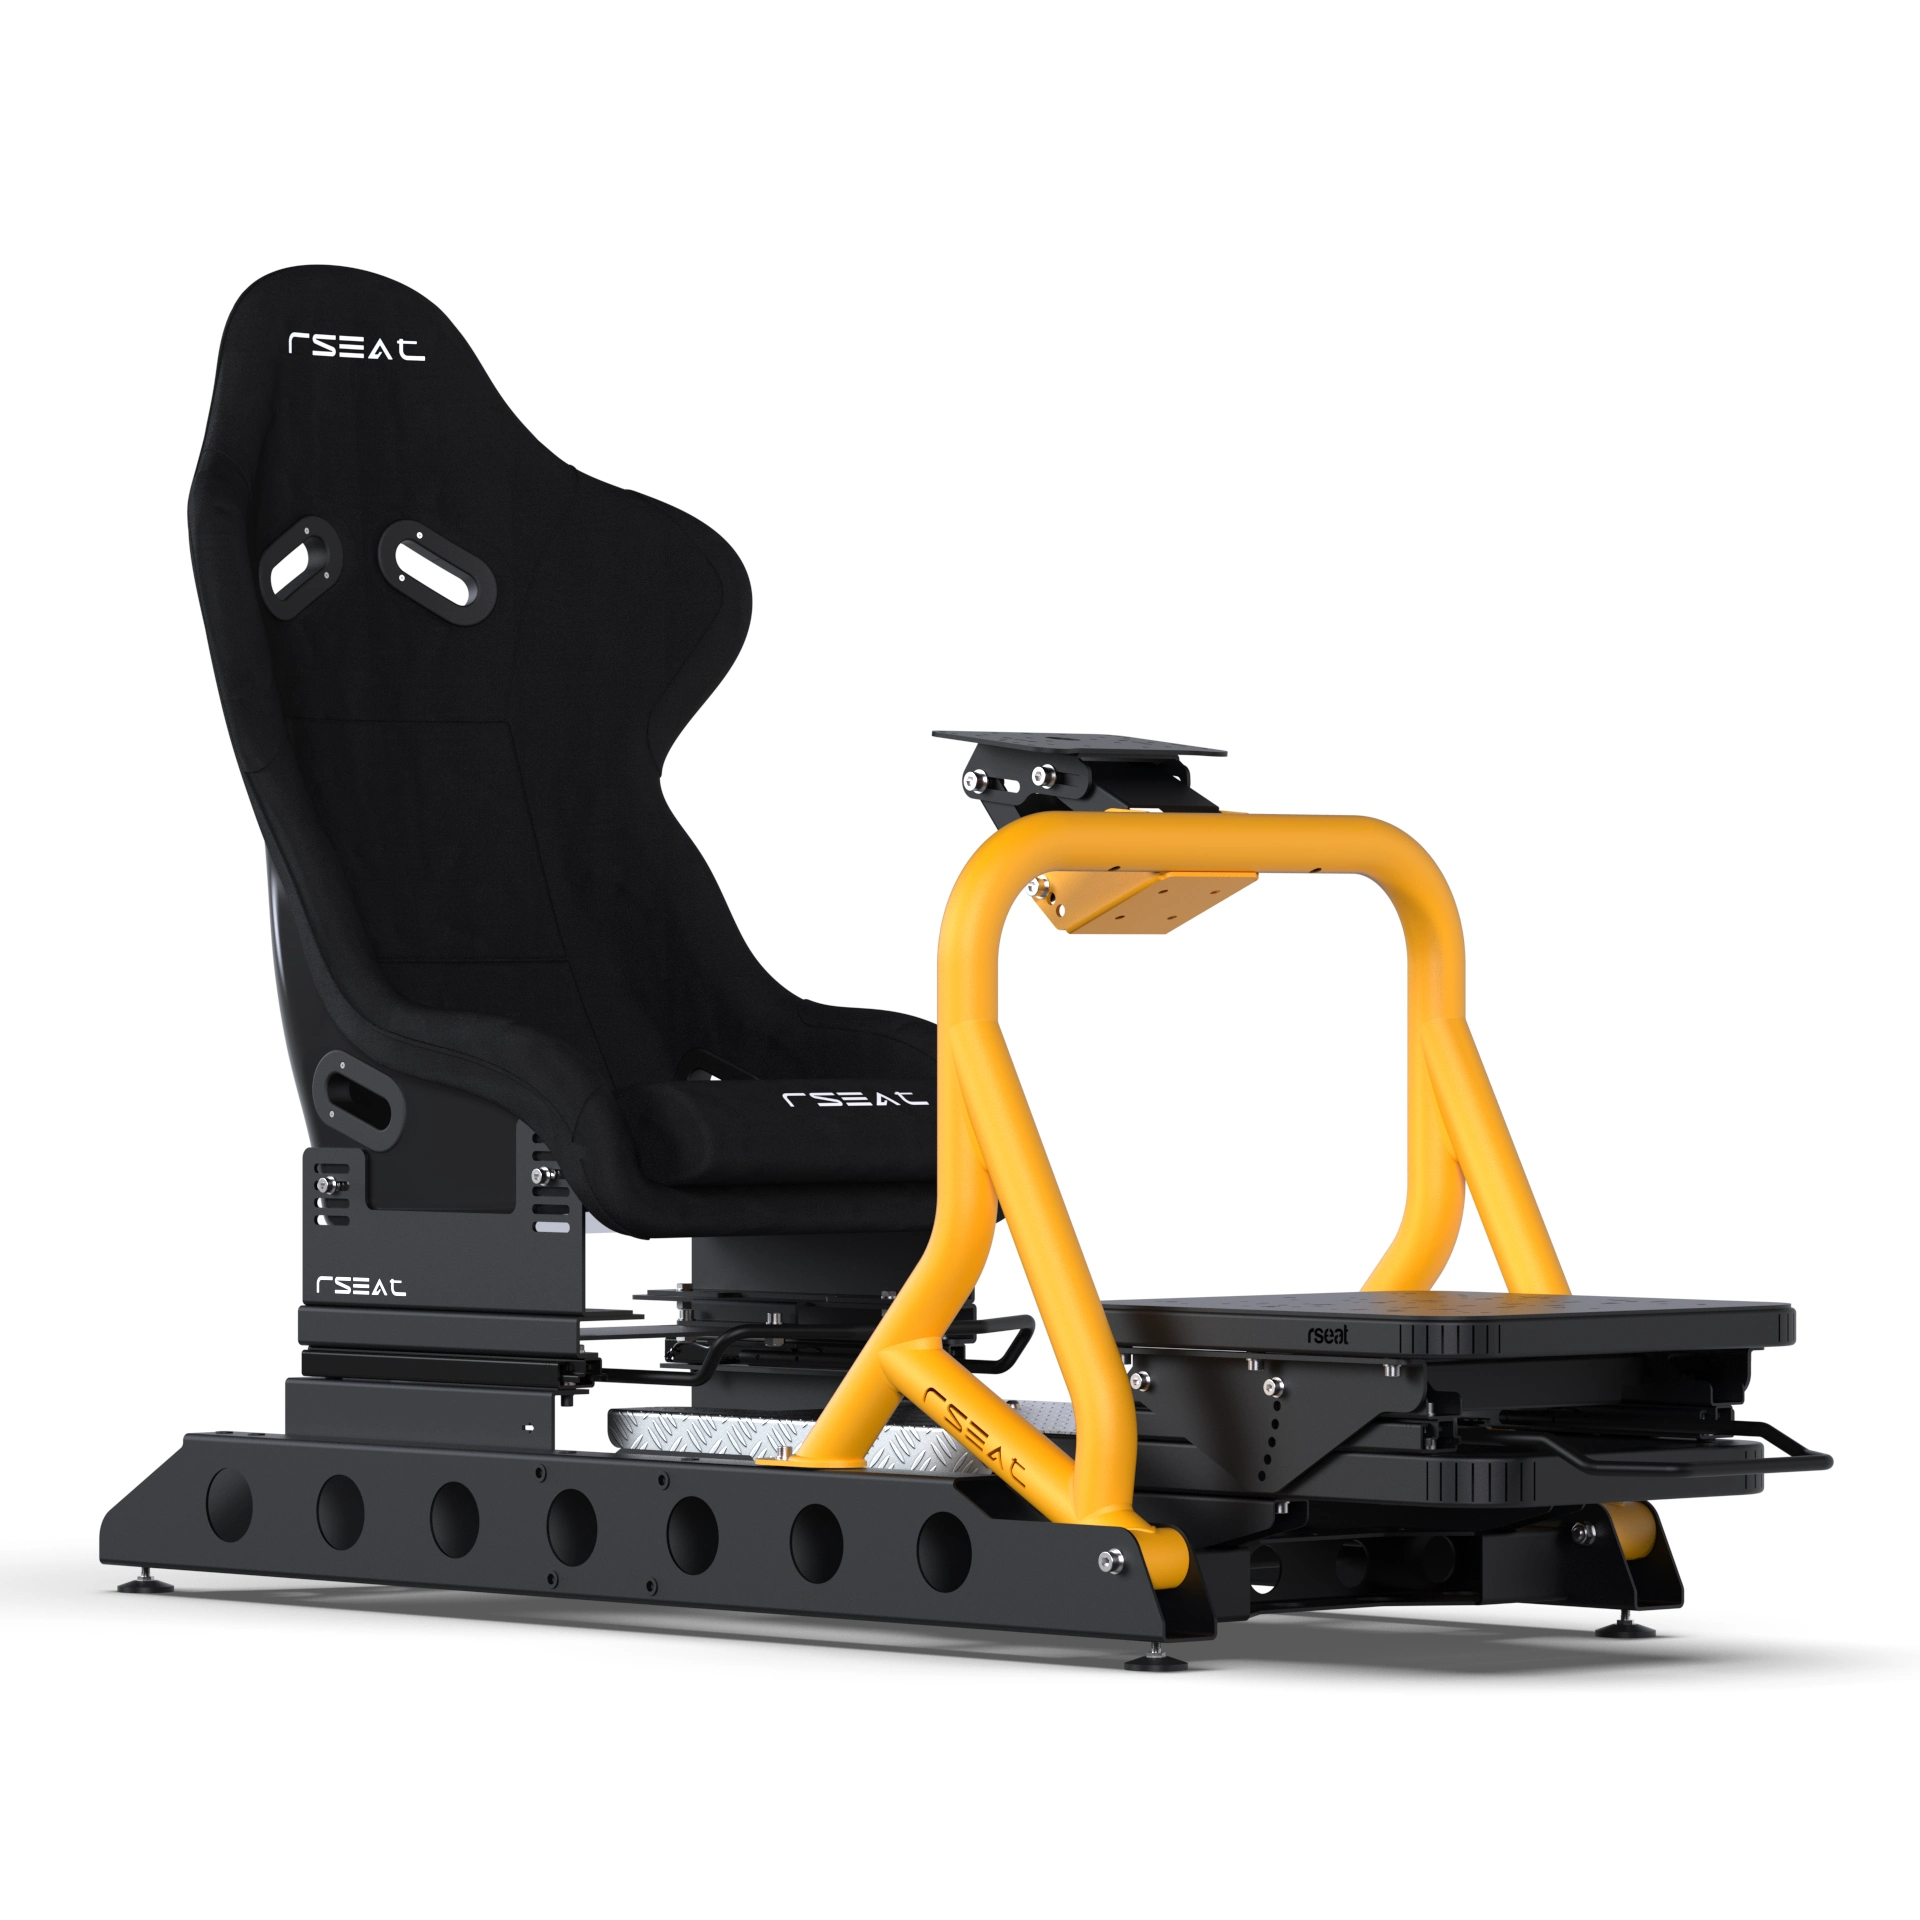 How to install a screen on oplite Wheel Stand GTR : r/simracing